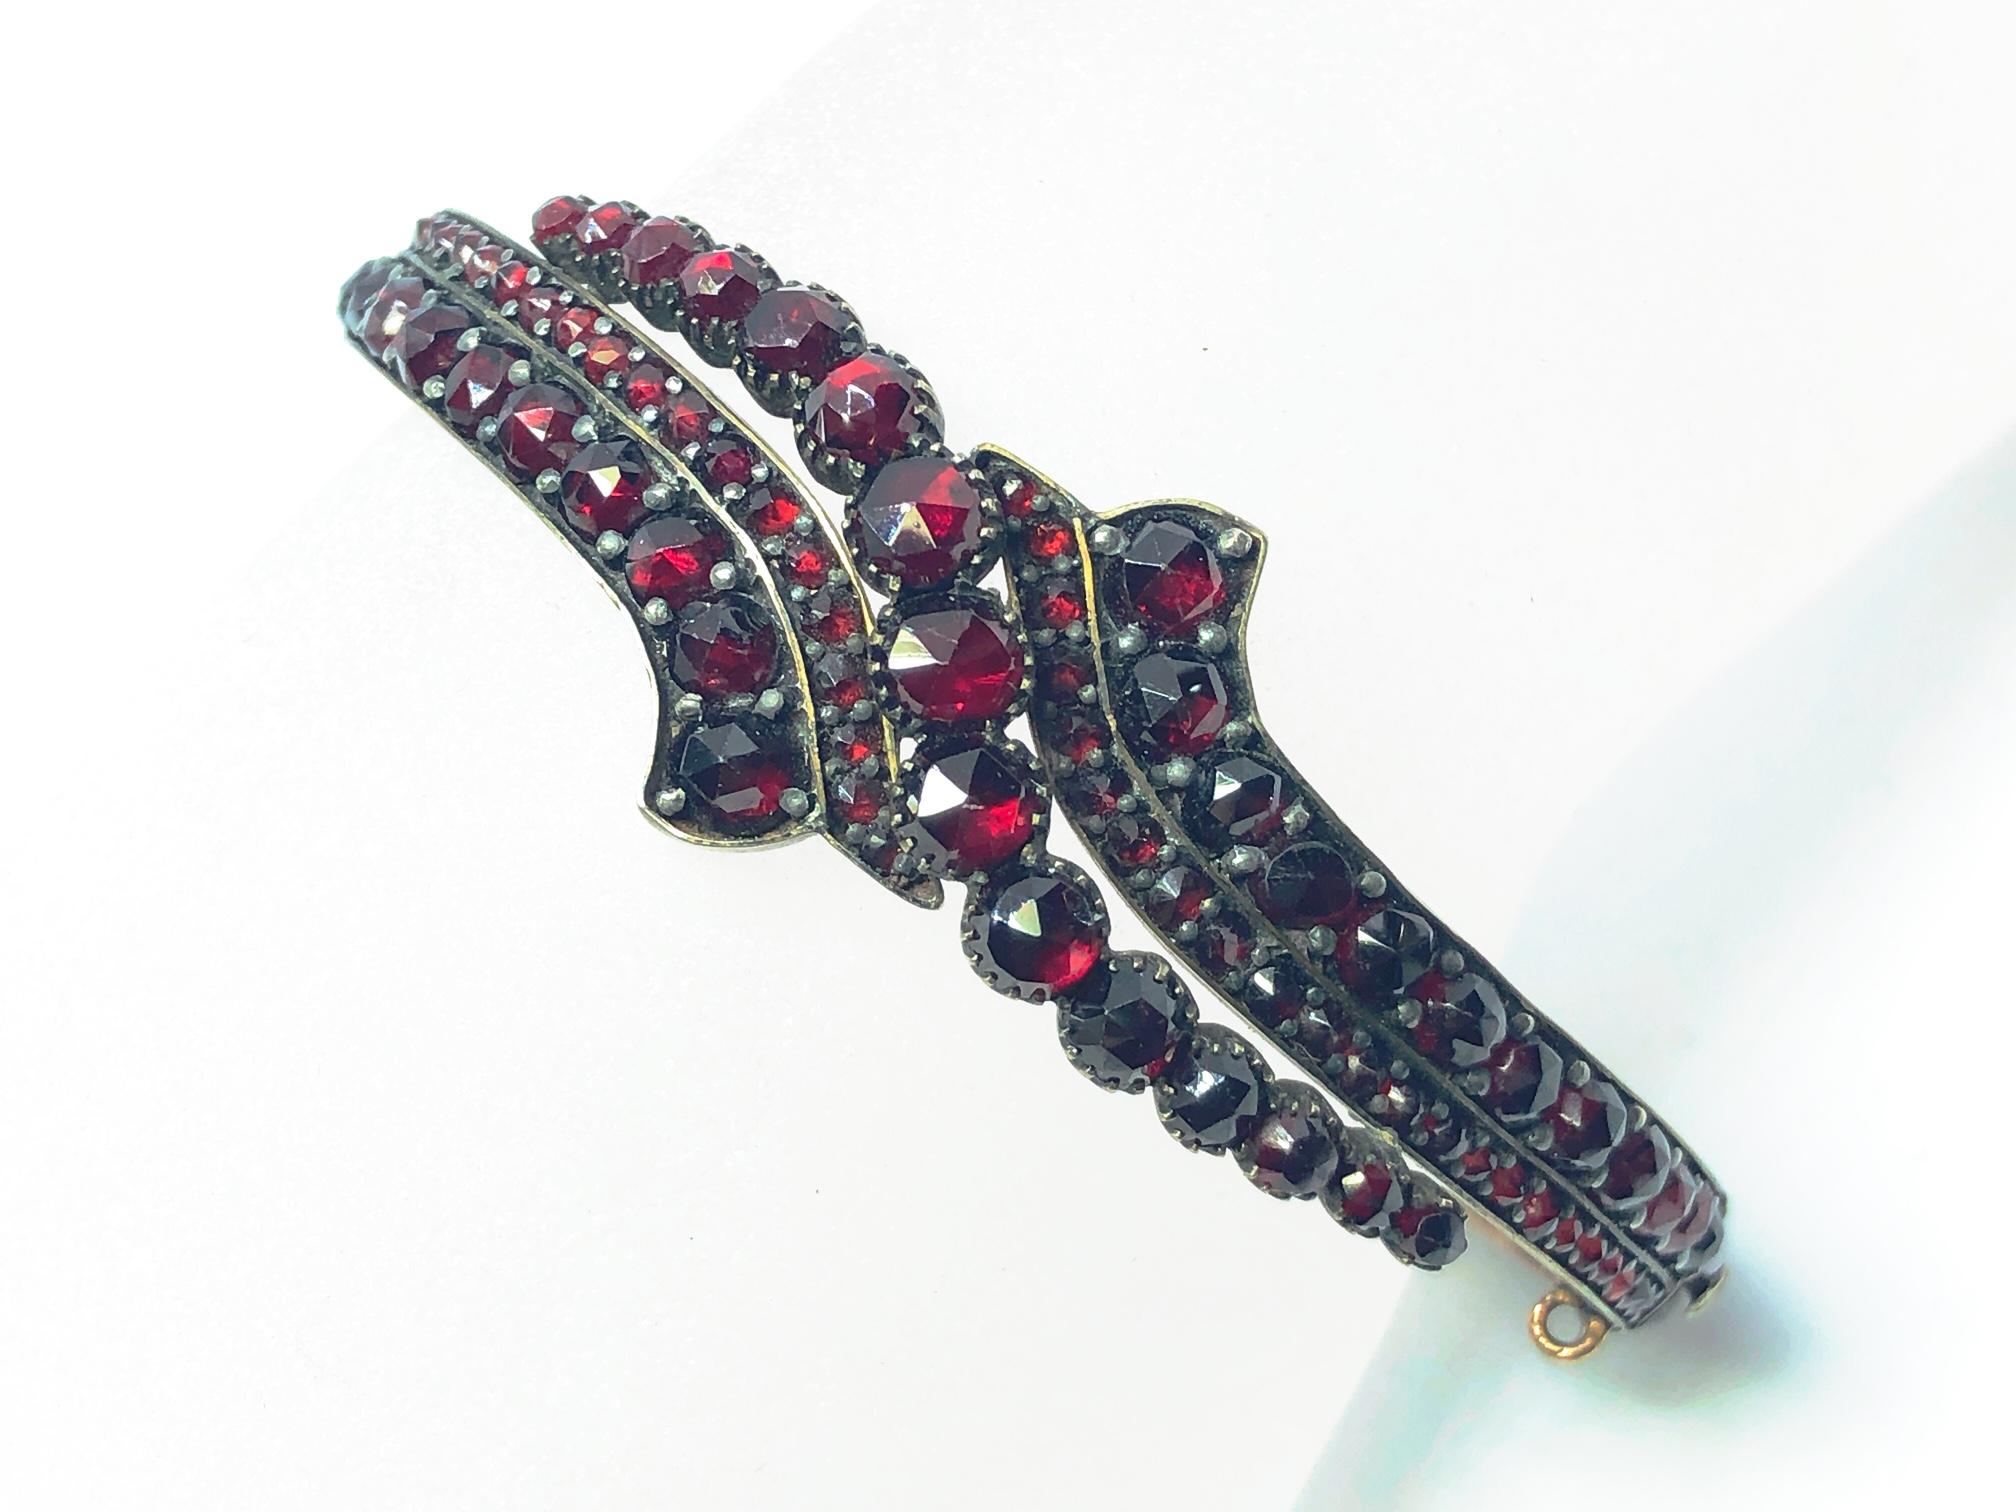 Victorian Bohemian garnet clasp bangle, rose cut garnets set in a crossover design to the full hoop, claw set in yellow metal, push clasp. Circa 1860.